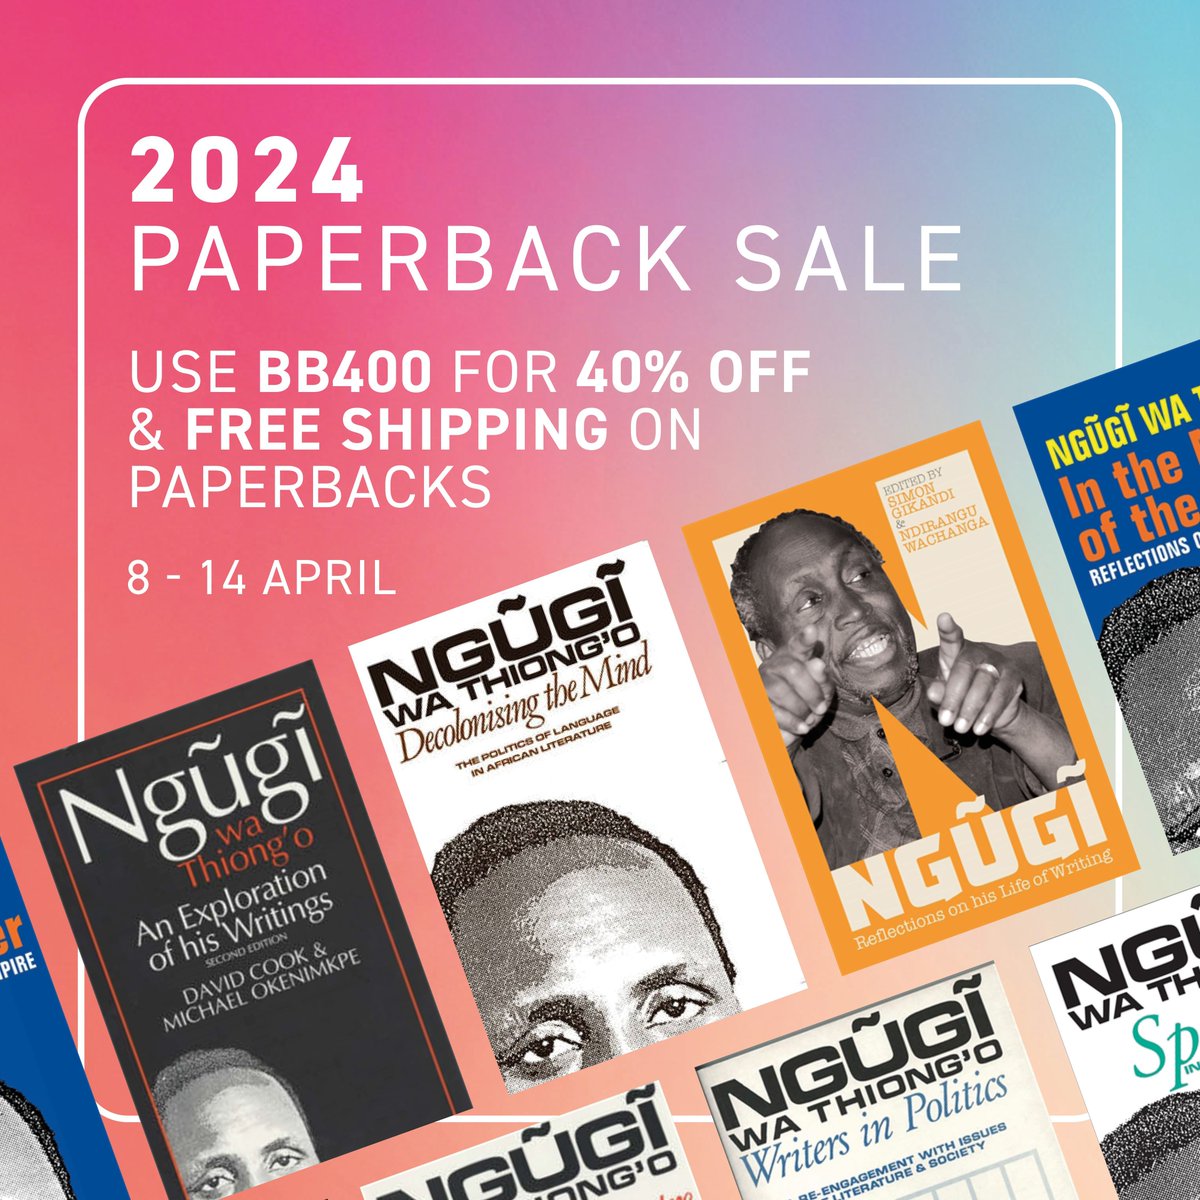 Save 40% on titles by and about Ngugi wa Thiong'o. All these titles and more are part of our paperback sale, now on until 14 April. 40% off and free shipping with code BB400 buff.ly/3J8zOzj #BookSale #Ngugi